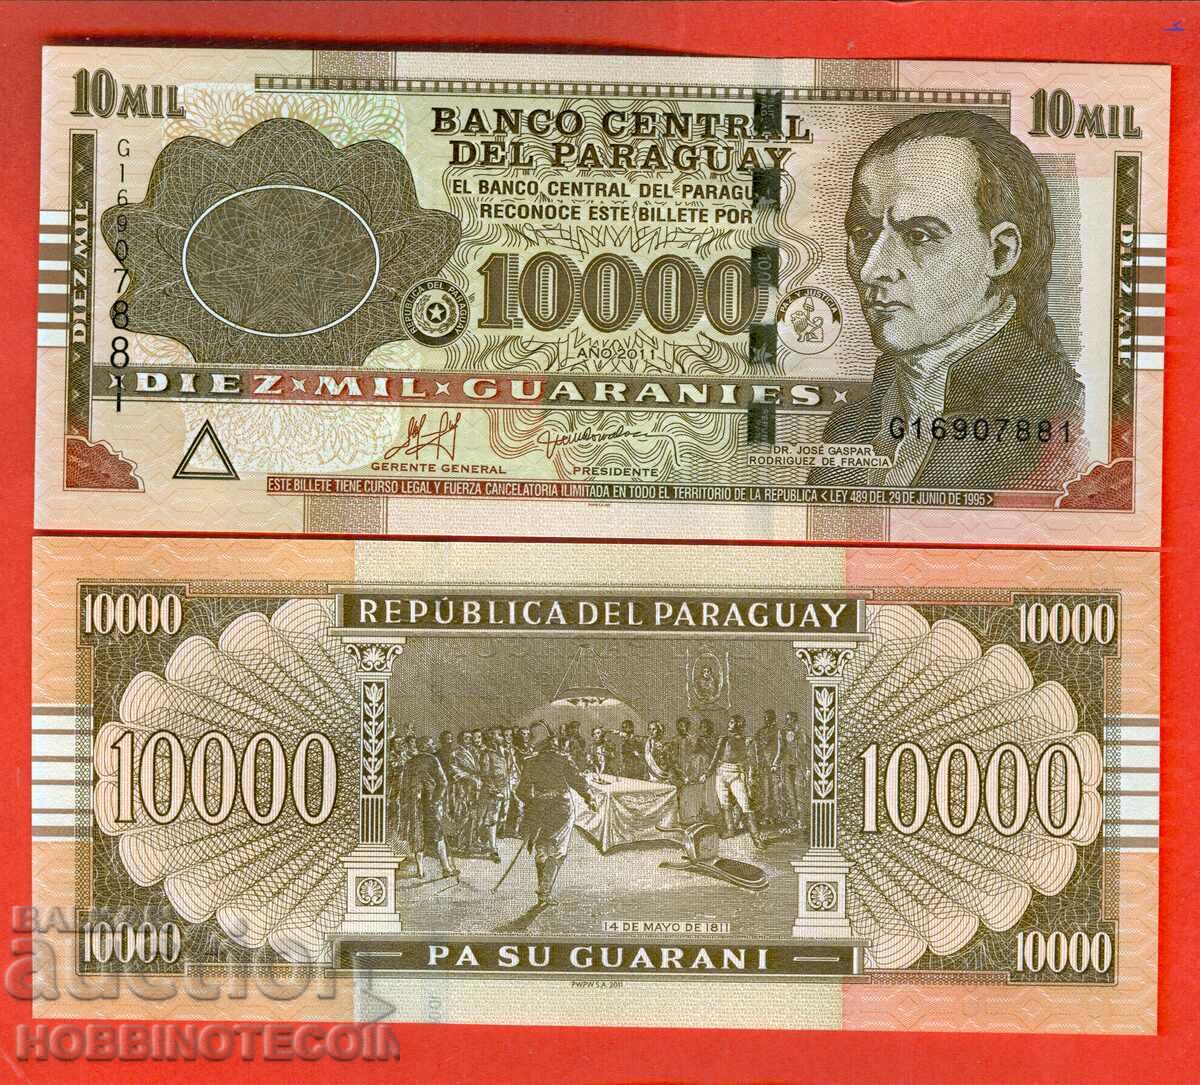 PARAGUAY PARAGUAY 10000 10,000 issue issue 2011 NEW UNC